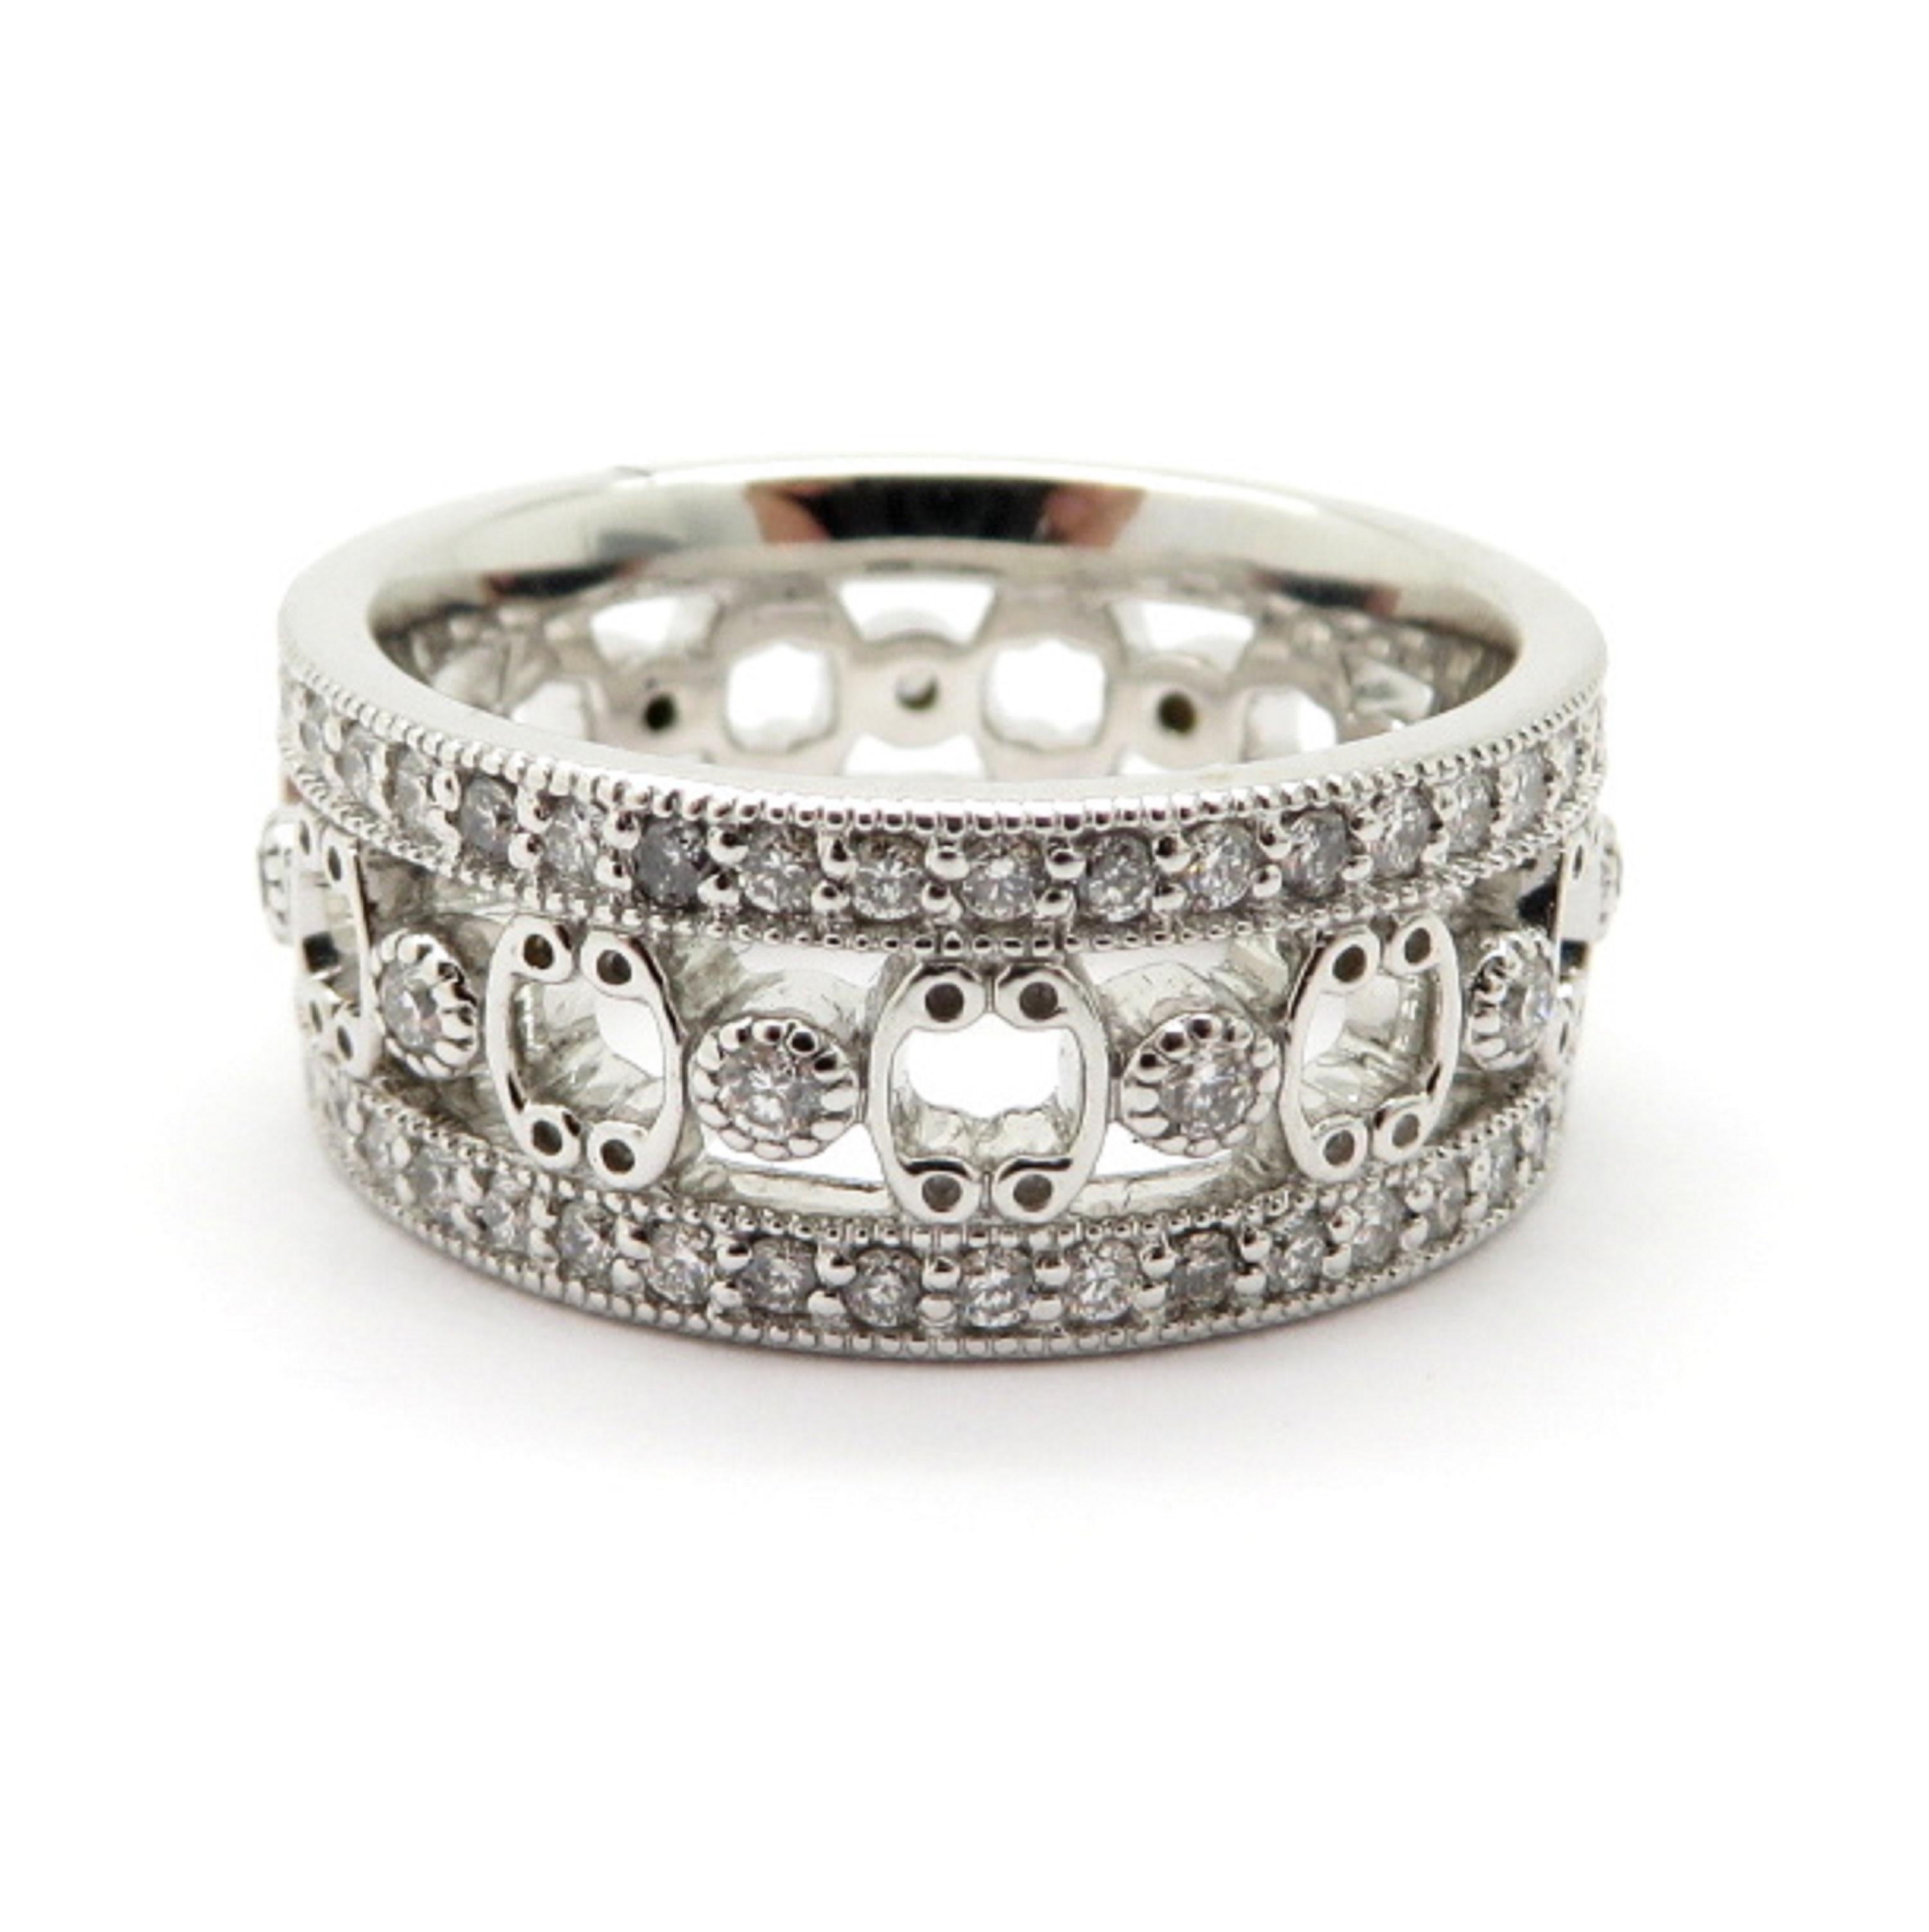 Designer Jude Frances diamond 18K white gold eternity band ring. Showcasing numerous round brilliant cut bead set diamonds weighing a combined total of 0.75 carats. Diamond grading: color grade: G – H. Clarity grade: VS1. The mounting measures 8.15